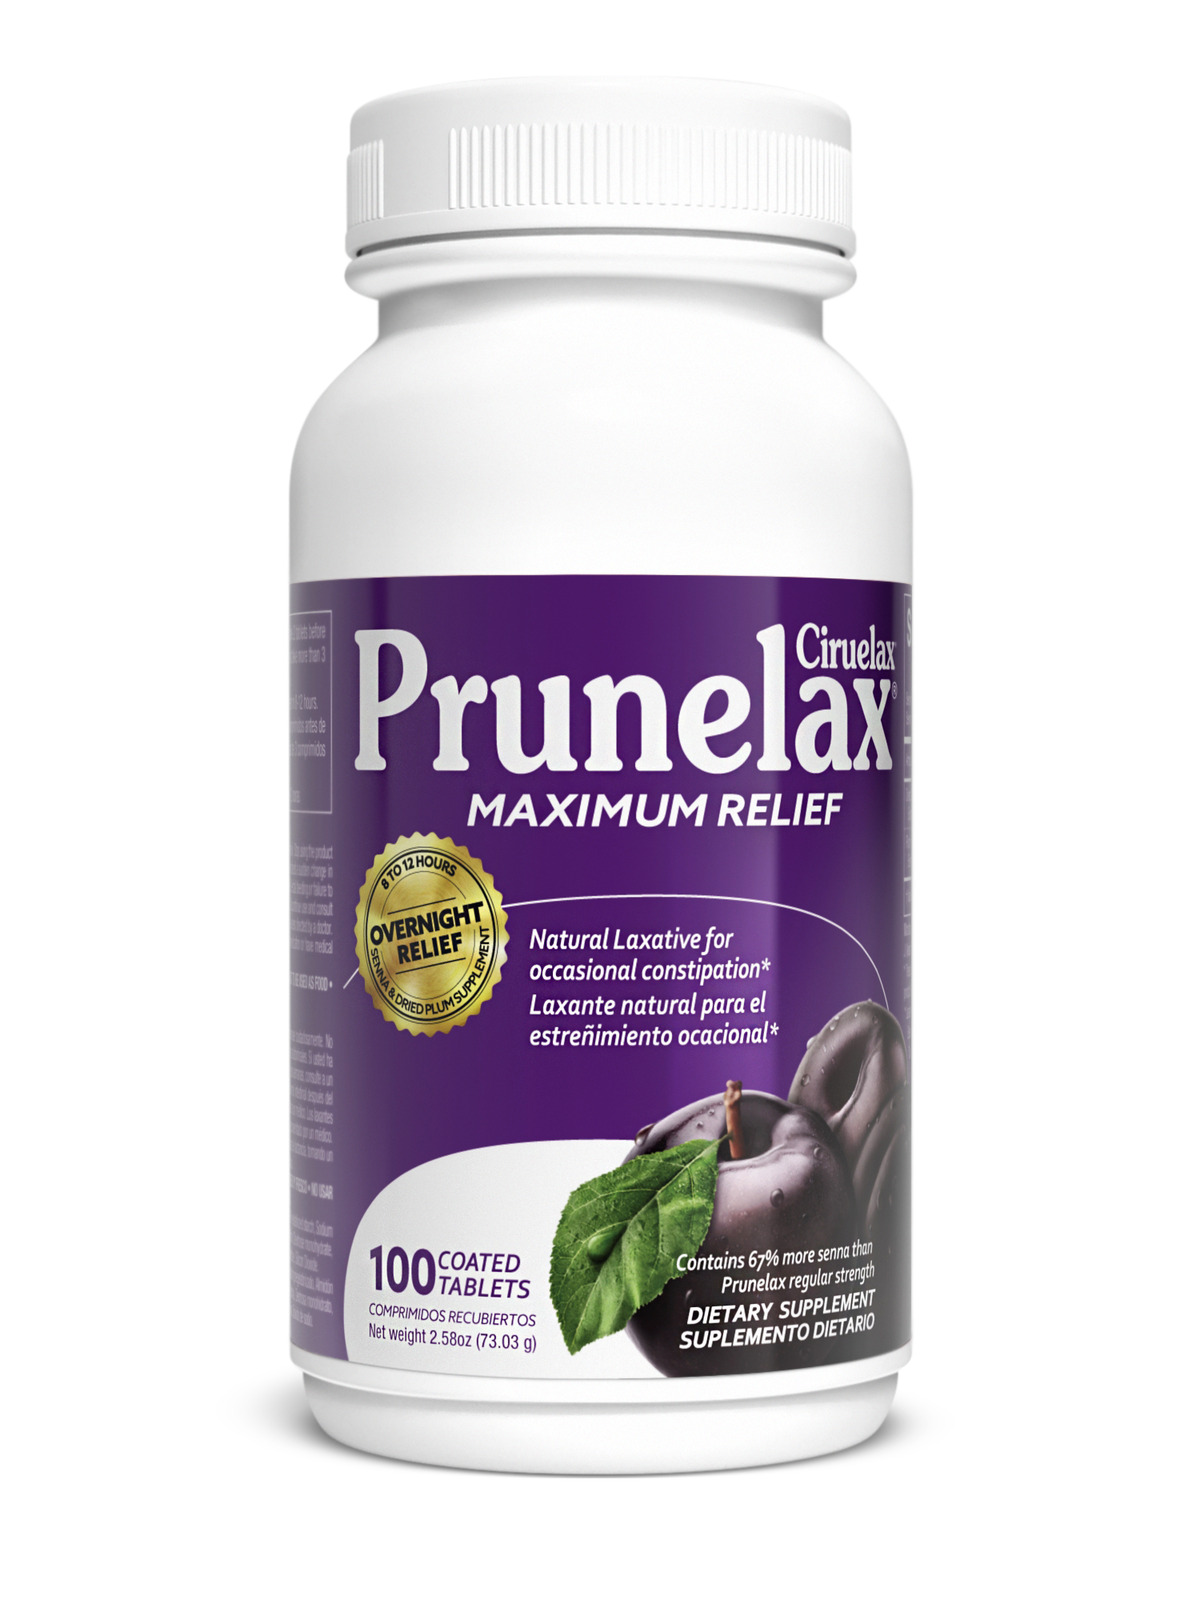 Prunelax Ciruelax Laxative Maximum Relief Tablets for Constipation - 100ct